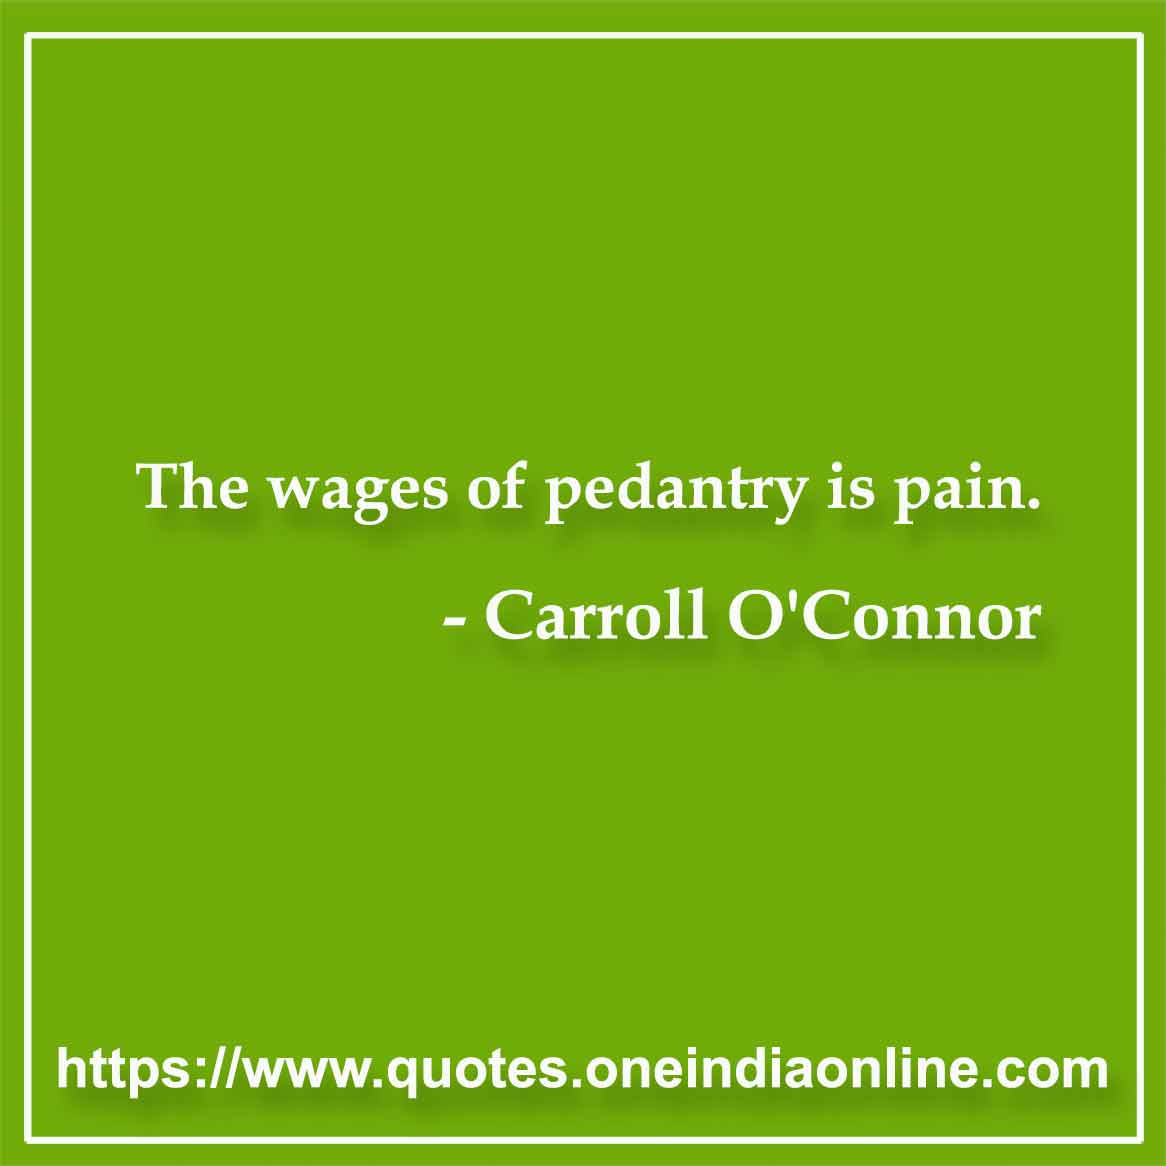 The wages of pedantry is pain.

- Carroll O'Connor